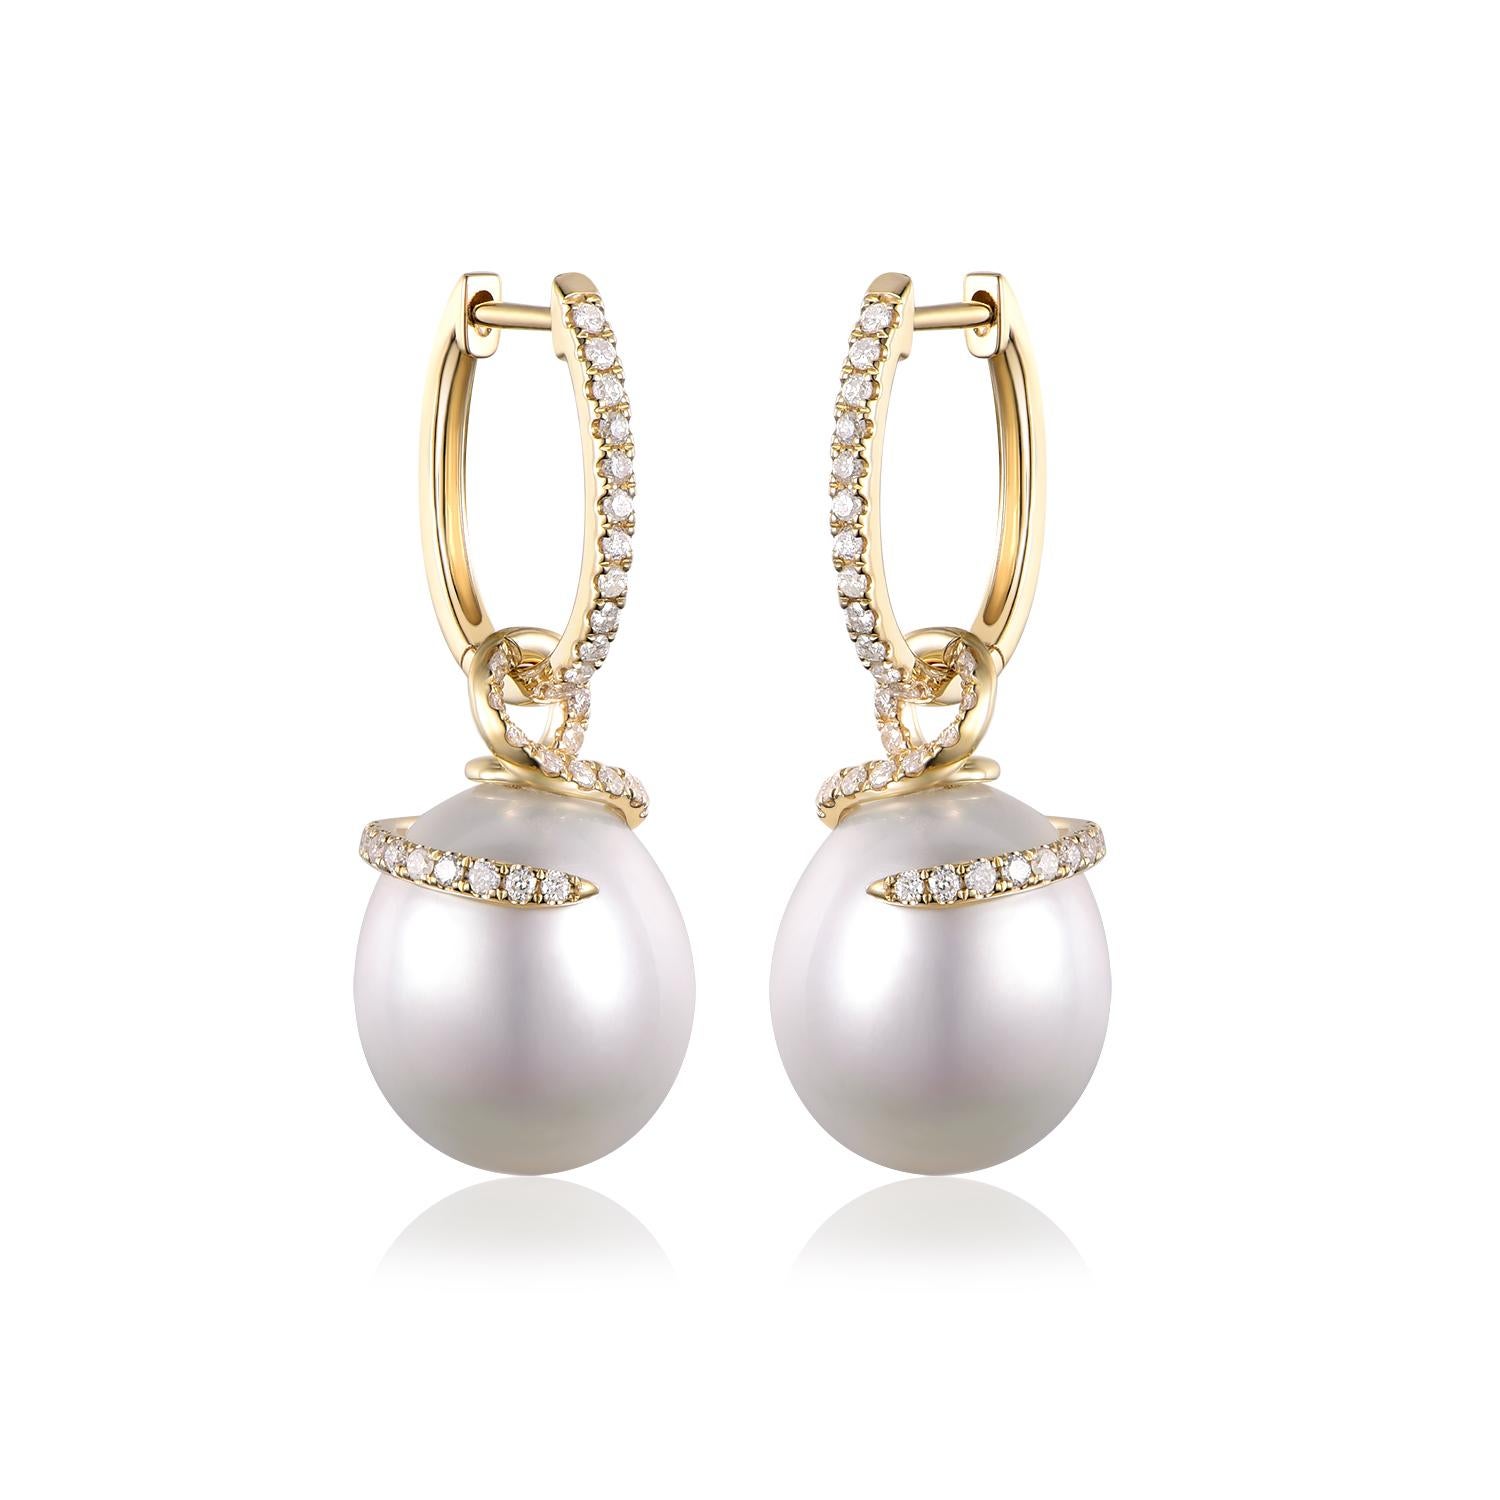 Discover the allure of these captivating drop earrings, featuring the organic charm of South Sea pearls. While they may not be perfectly round, the pearls' unique shape, measuring approximately 12 x 14mm, only adds to their natural splendor,